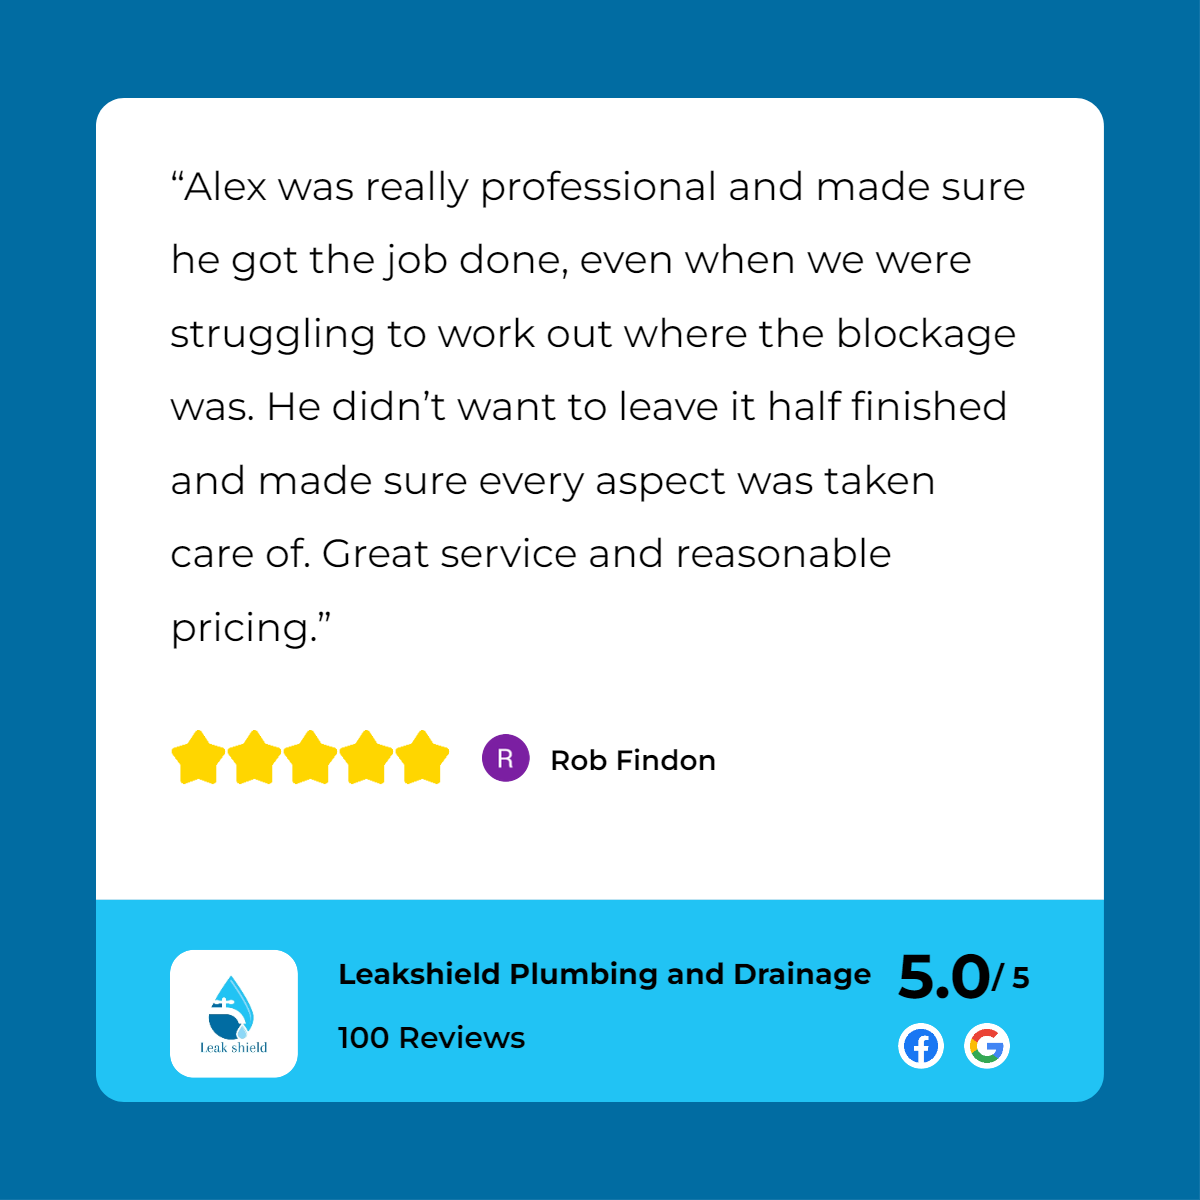 A customer review for a plumber in san diego, california.